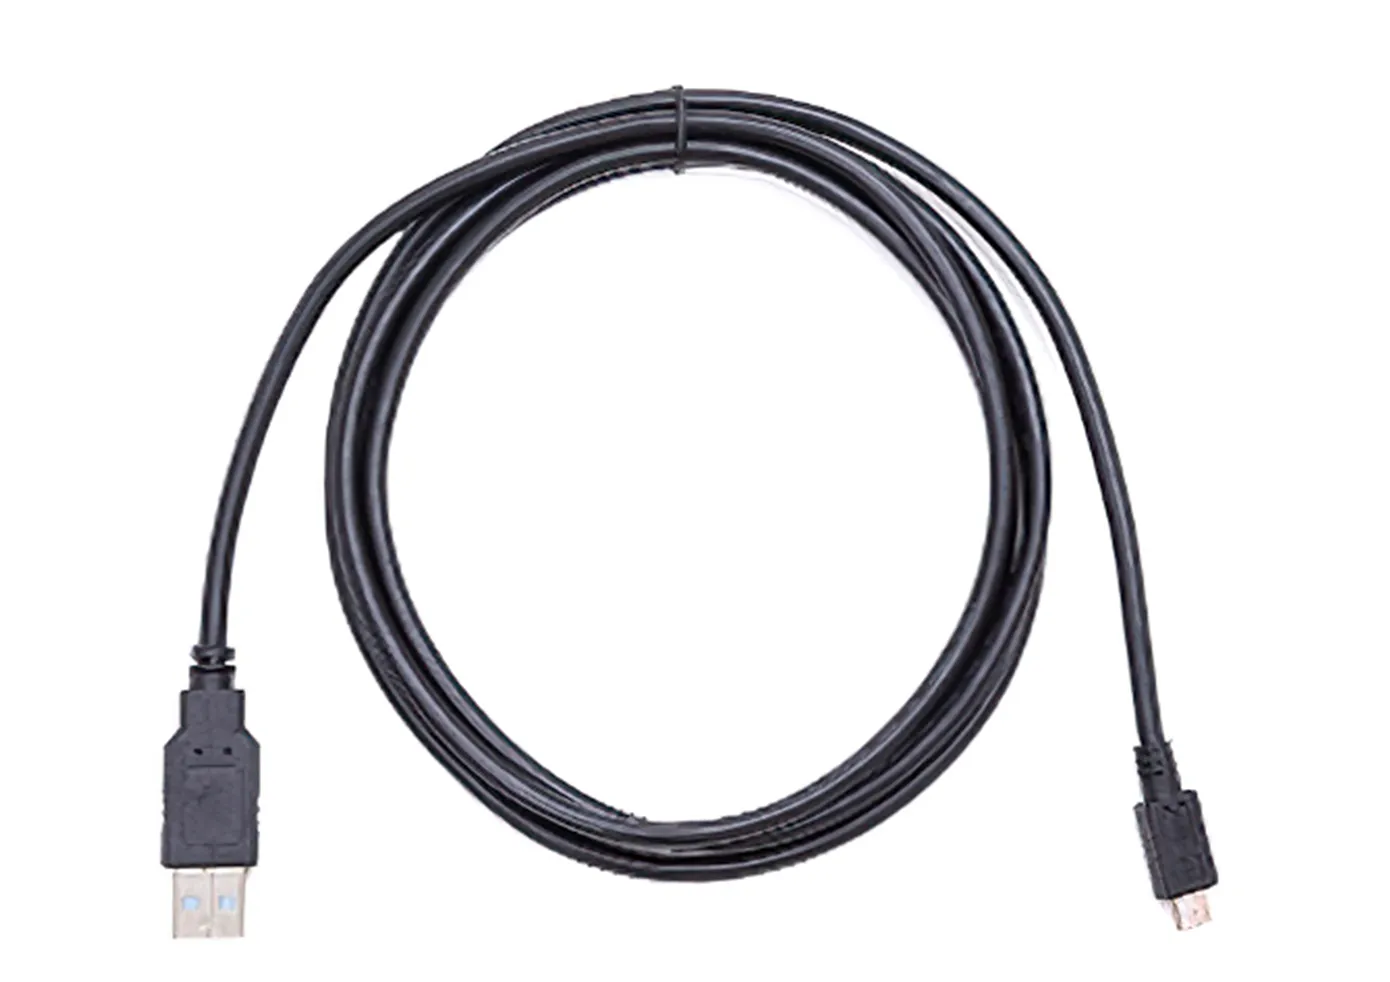 Cable, USB to Micro USB<br/>

<span class="clsSpnProdMdls"></span>